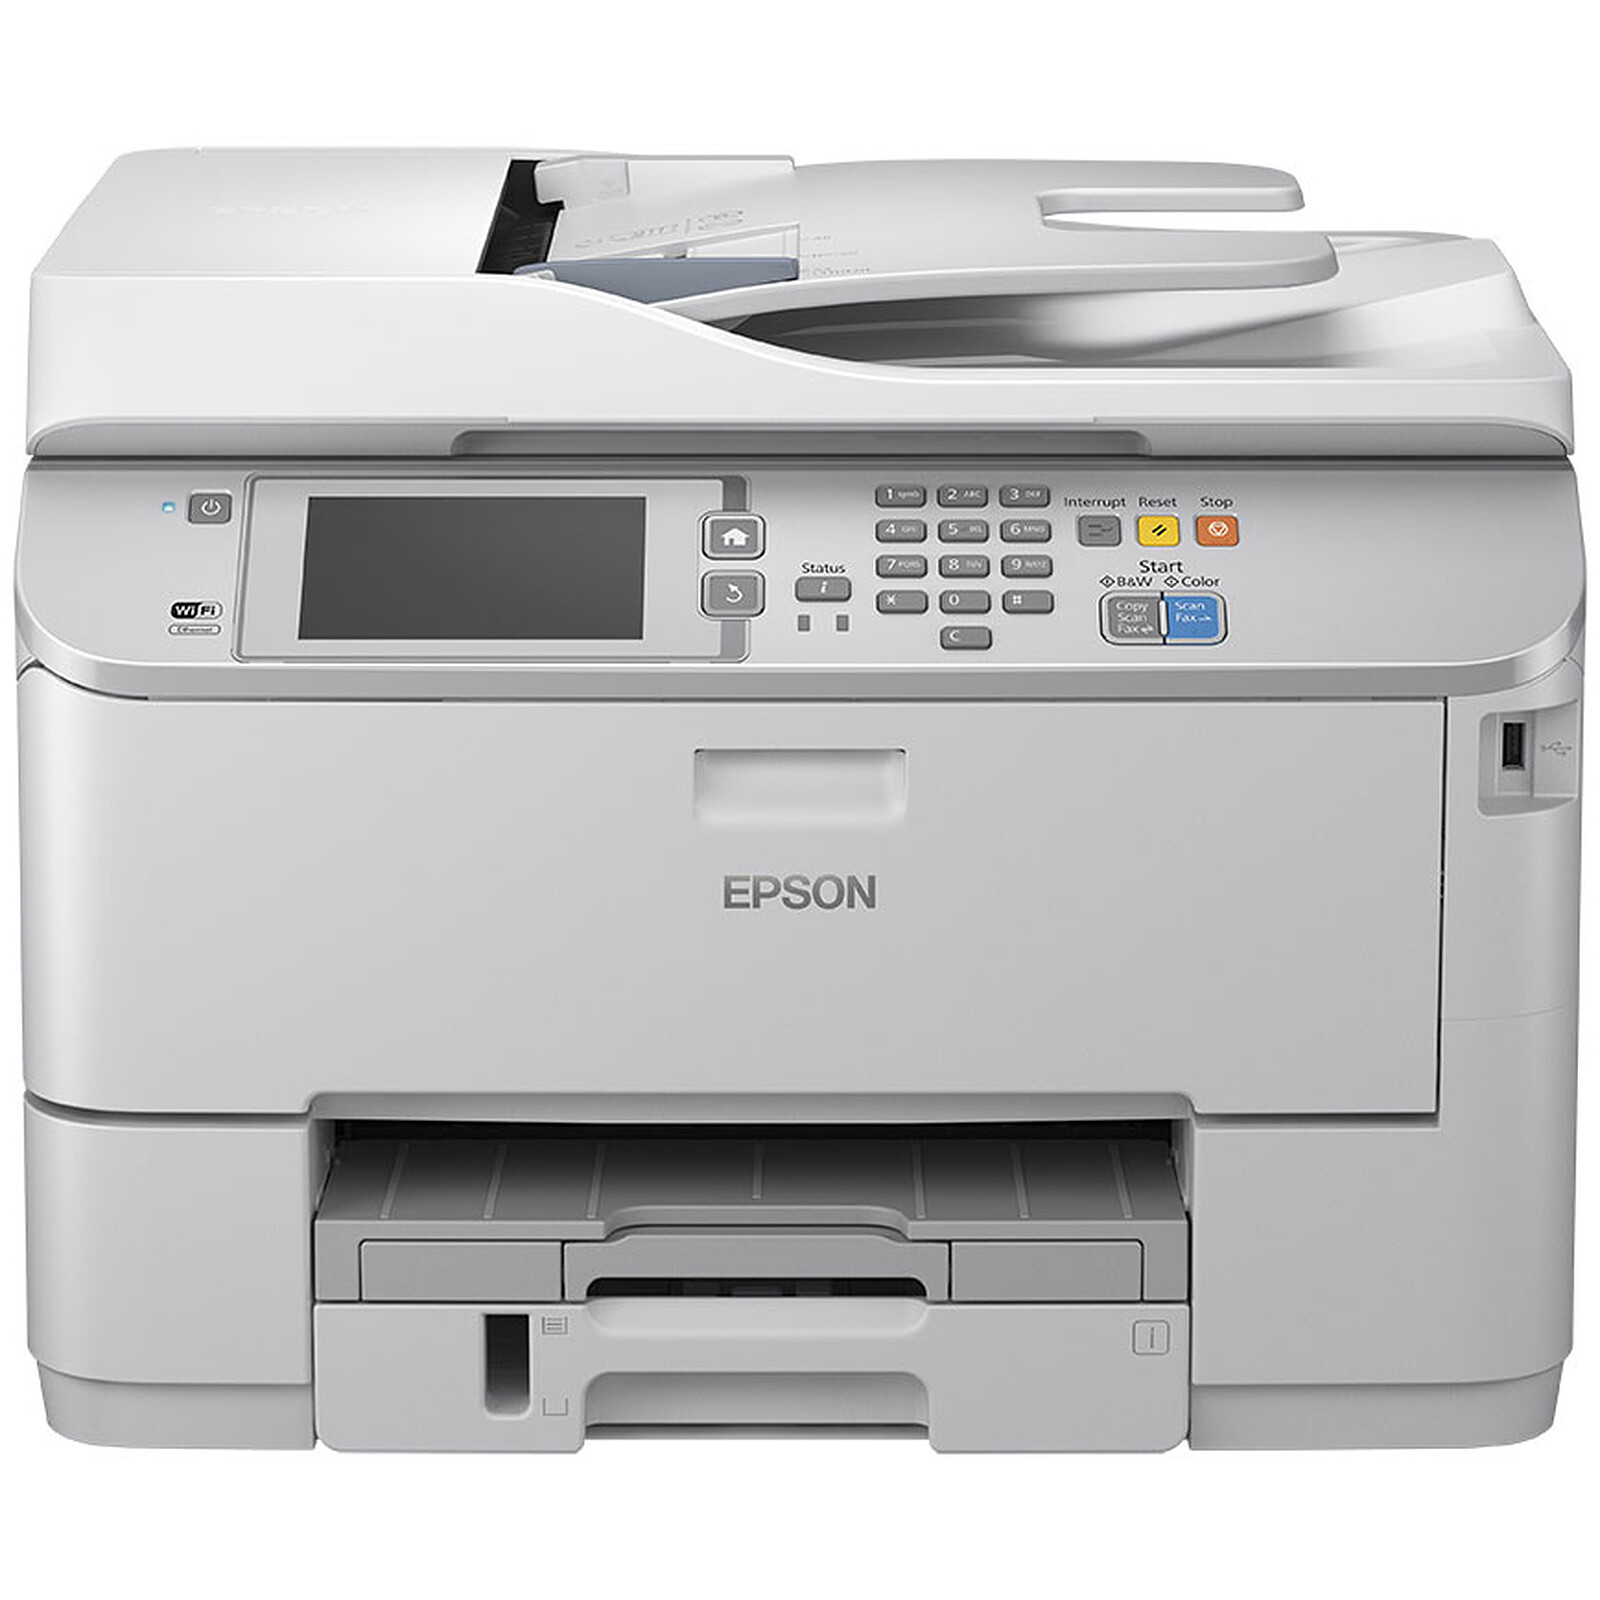 Epson Expression Home XP-2200 - All-in-one printer - LDLC 3-year warranty